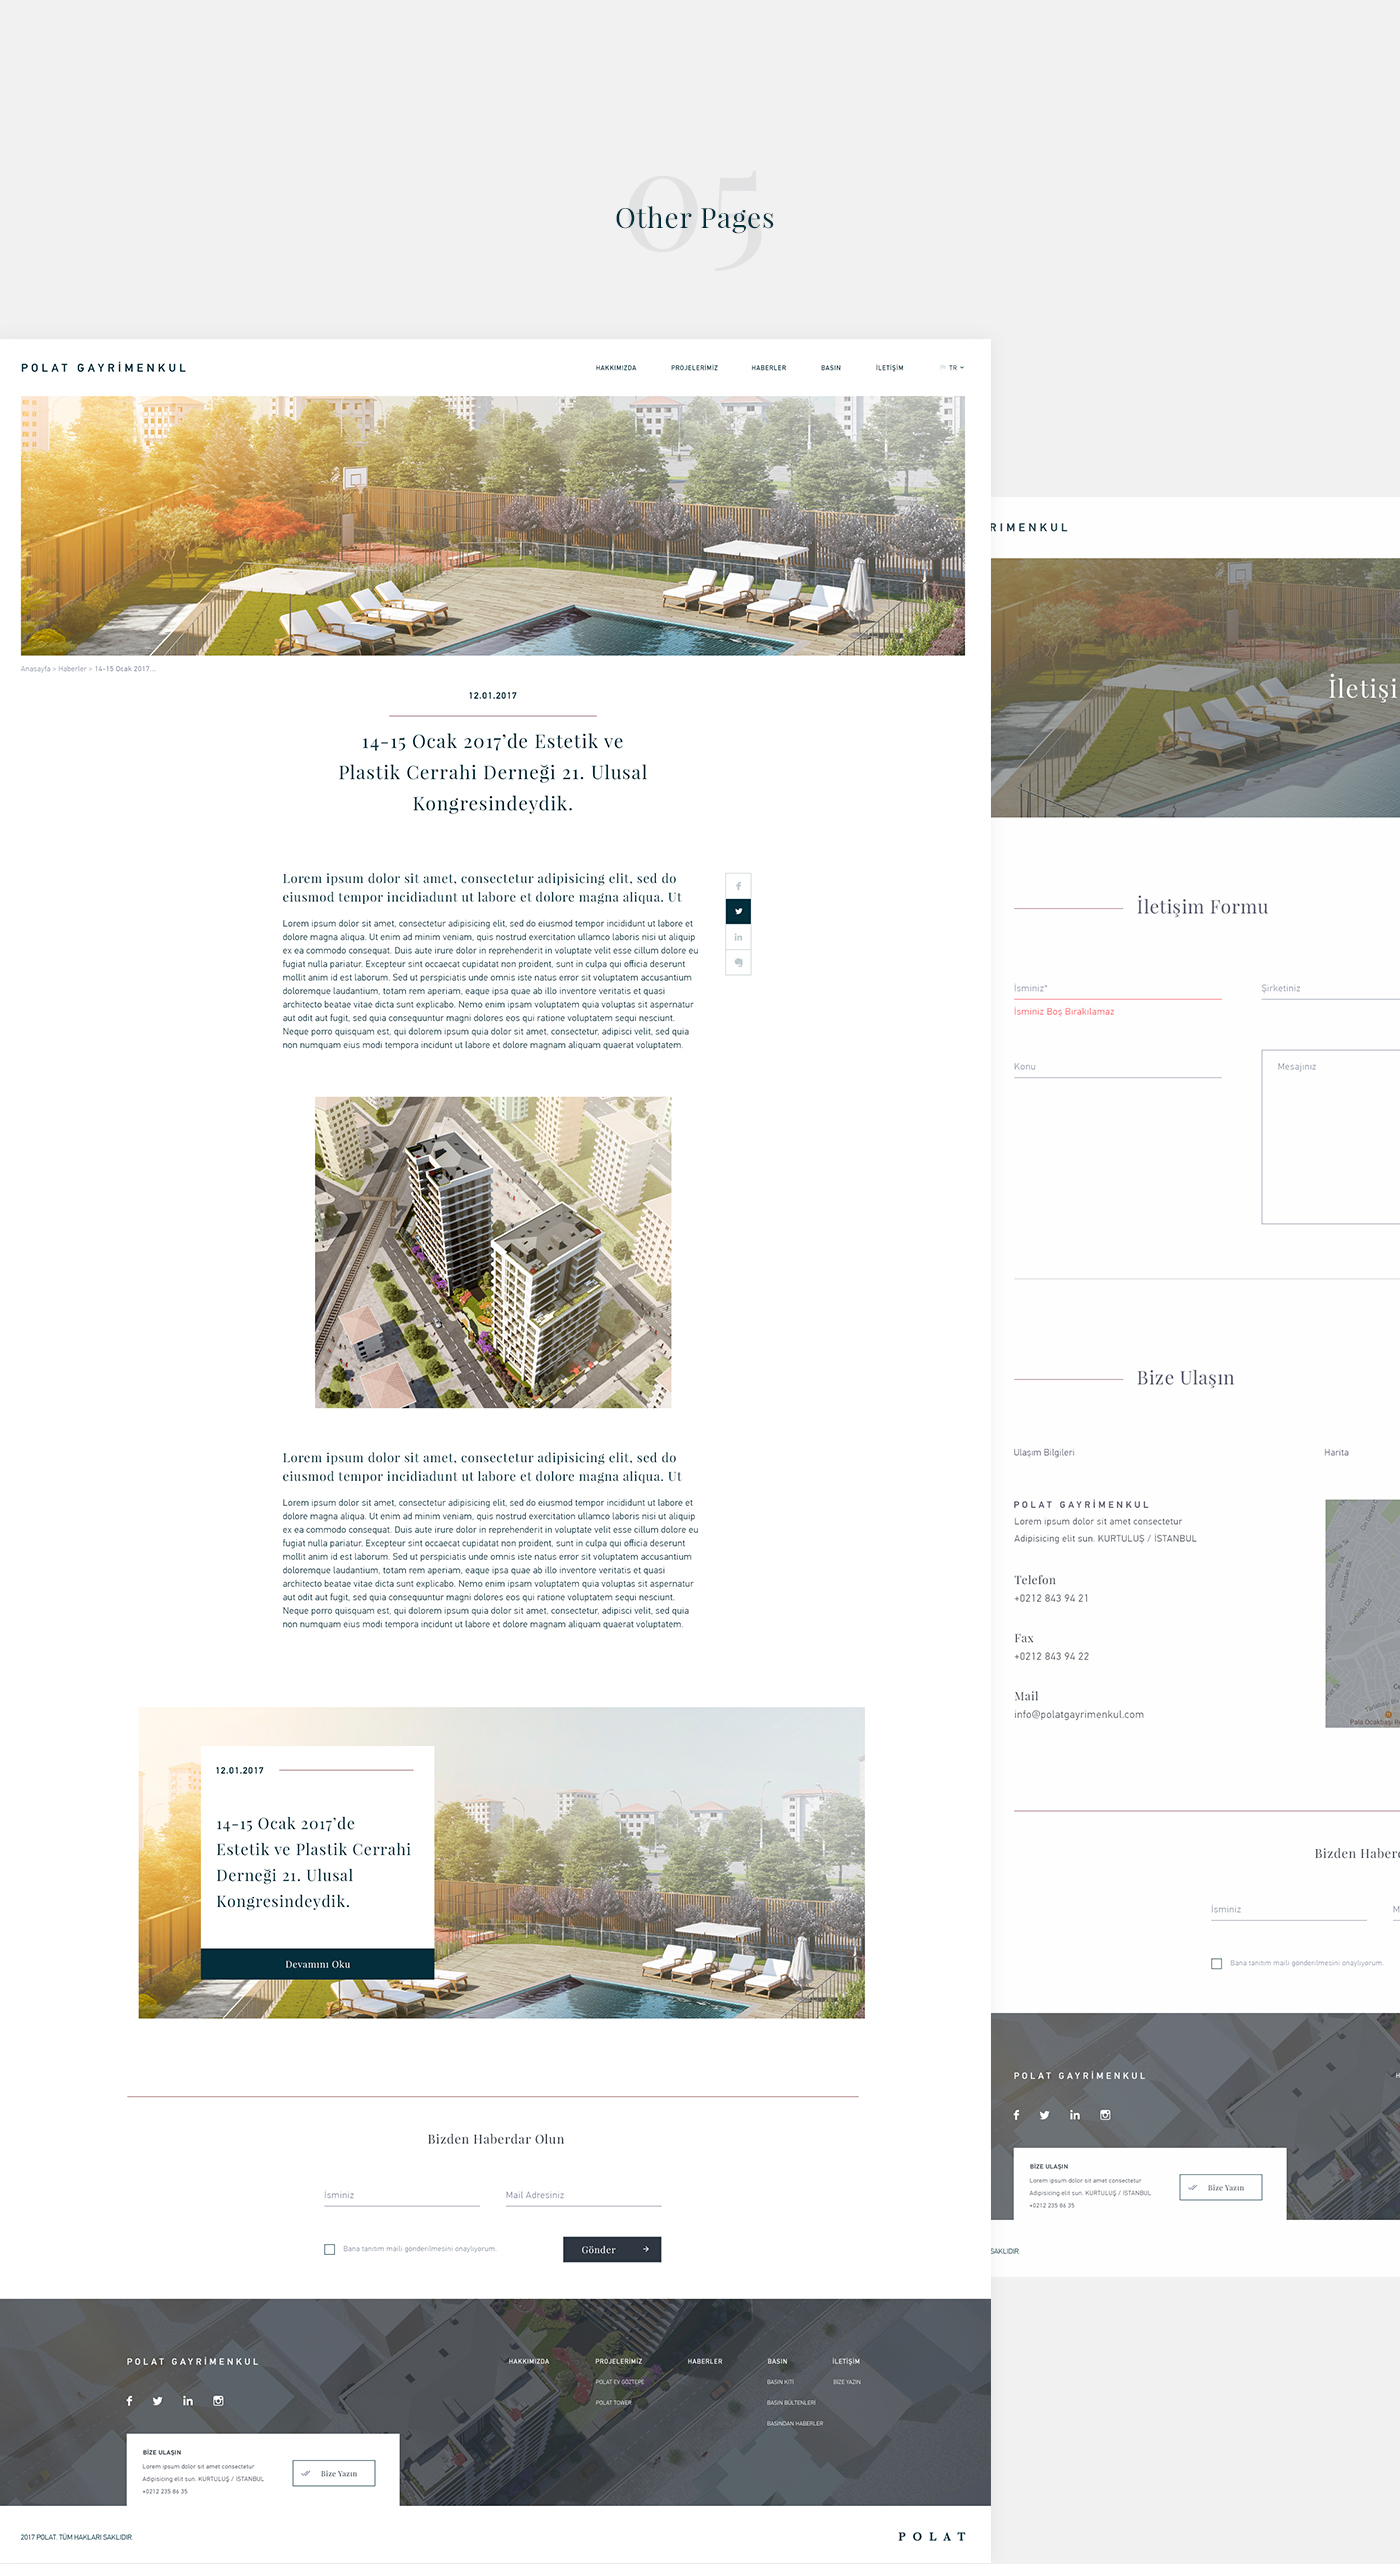 Website redesign consept architecture clean animate Project corporate